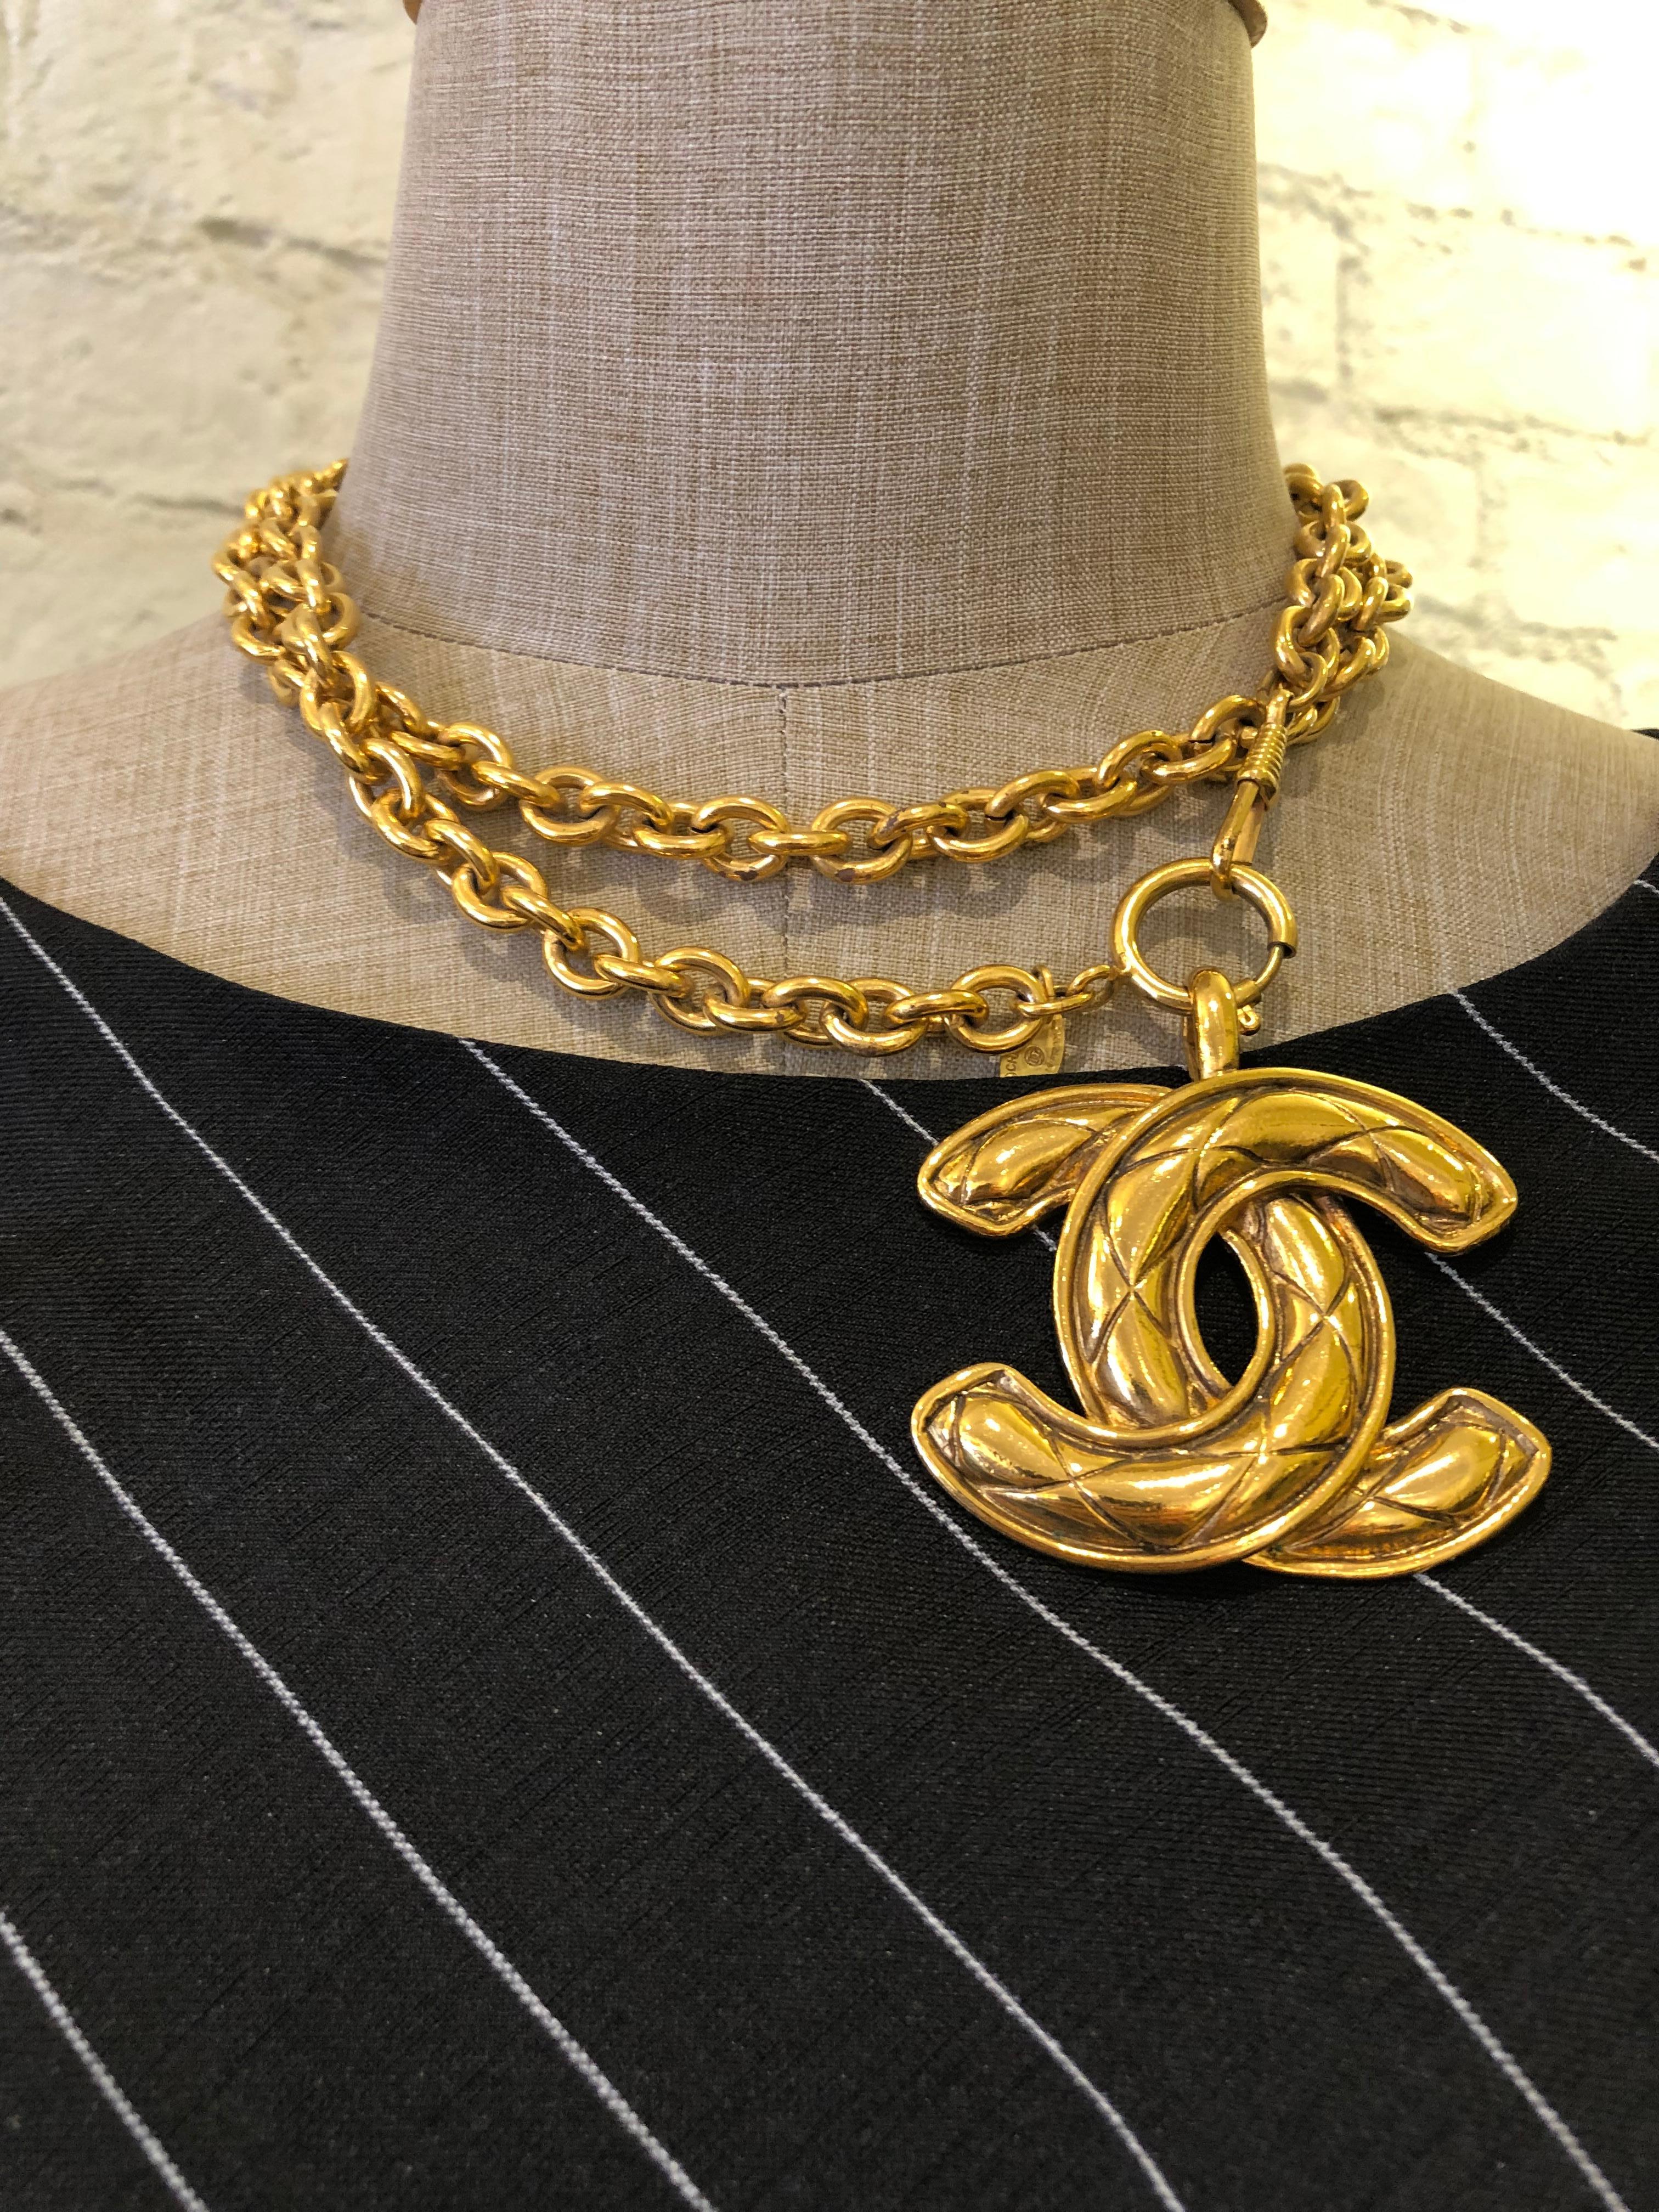 Vintage Chanel gold toned chain necklace featuring a huge iconic gold toned Chanel quilted CC charm. The largest of the quilted CC series. It can be worn single chained as a long necklace or double chained as a short necklace. Stamped CHANEL made in